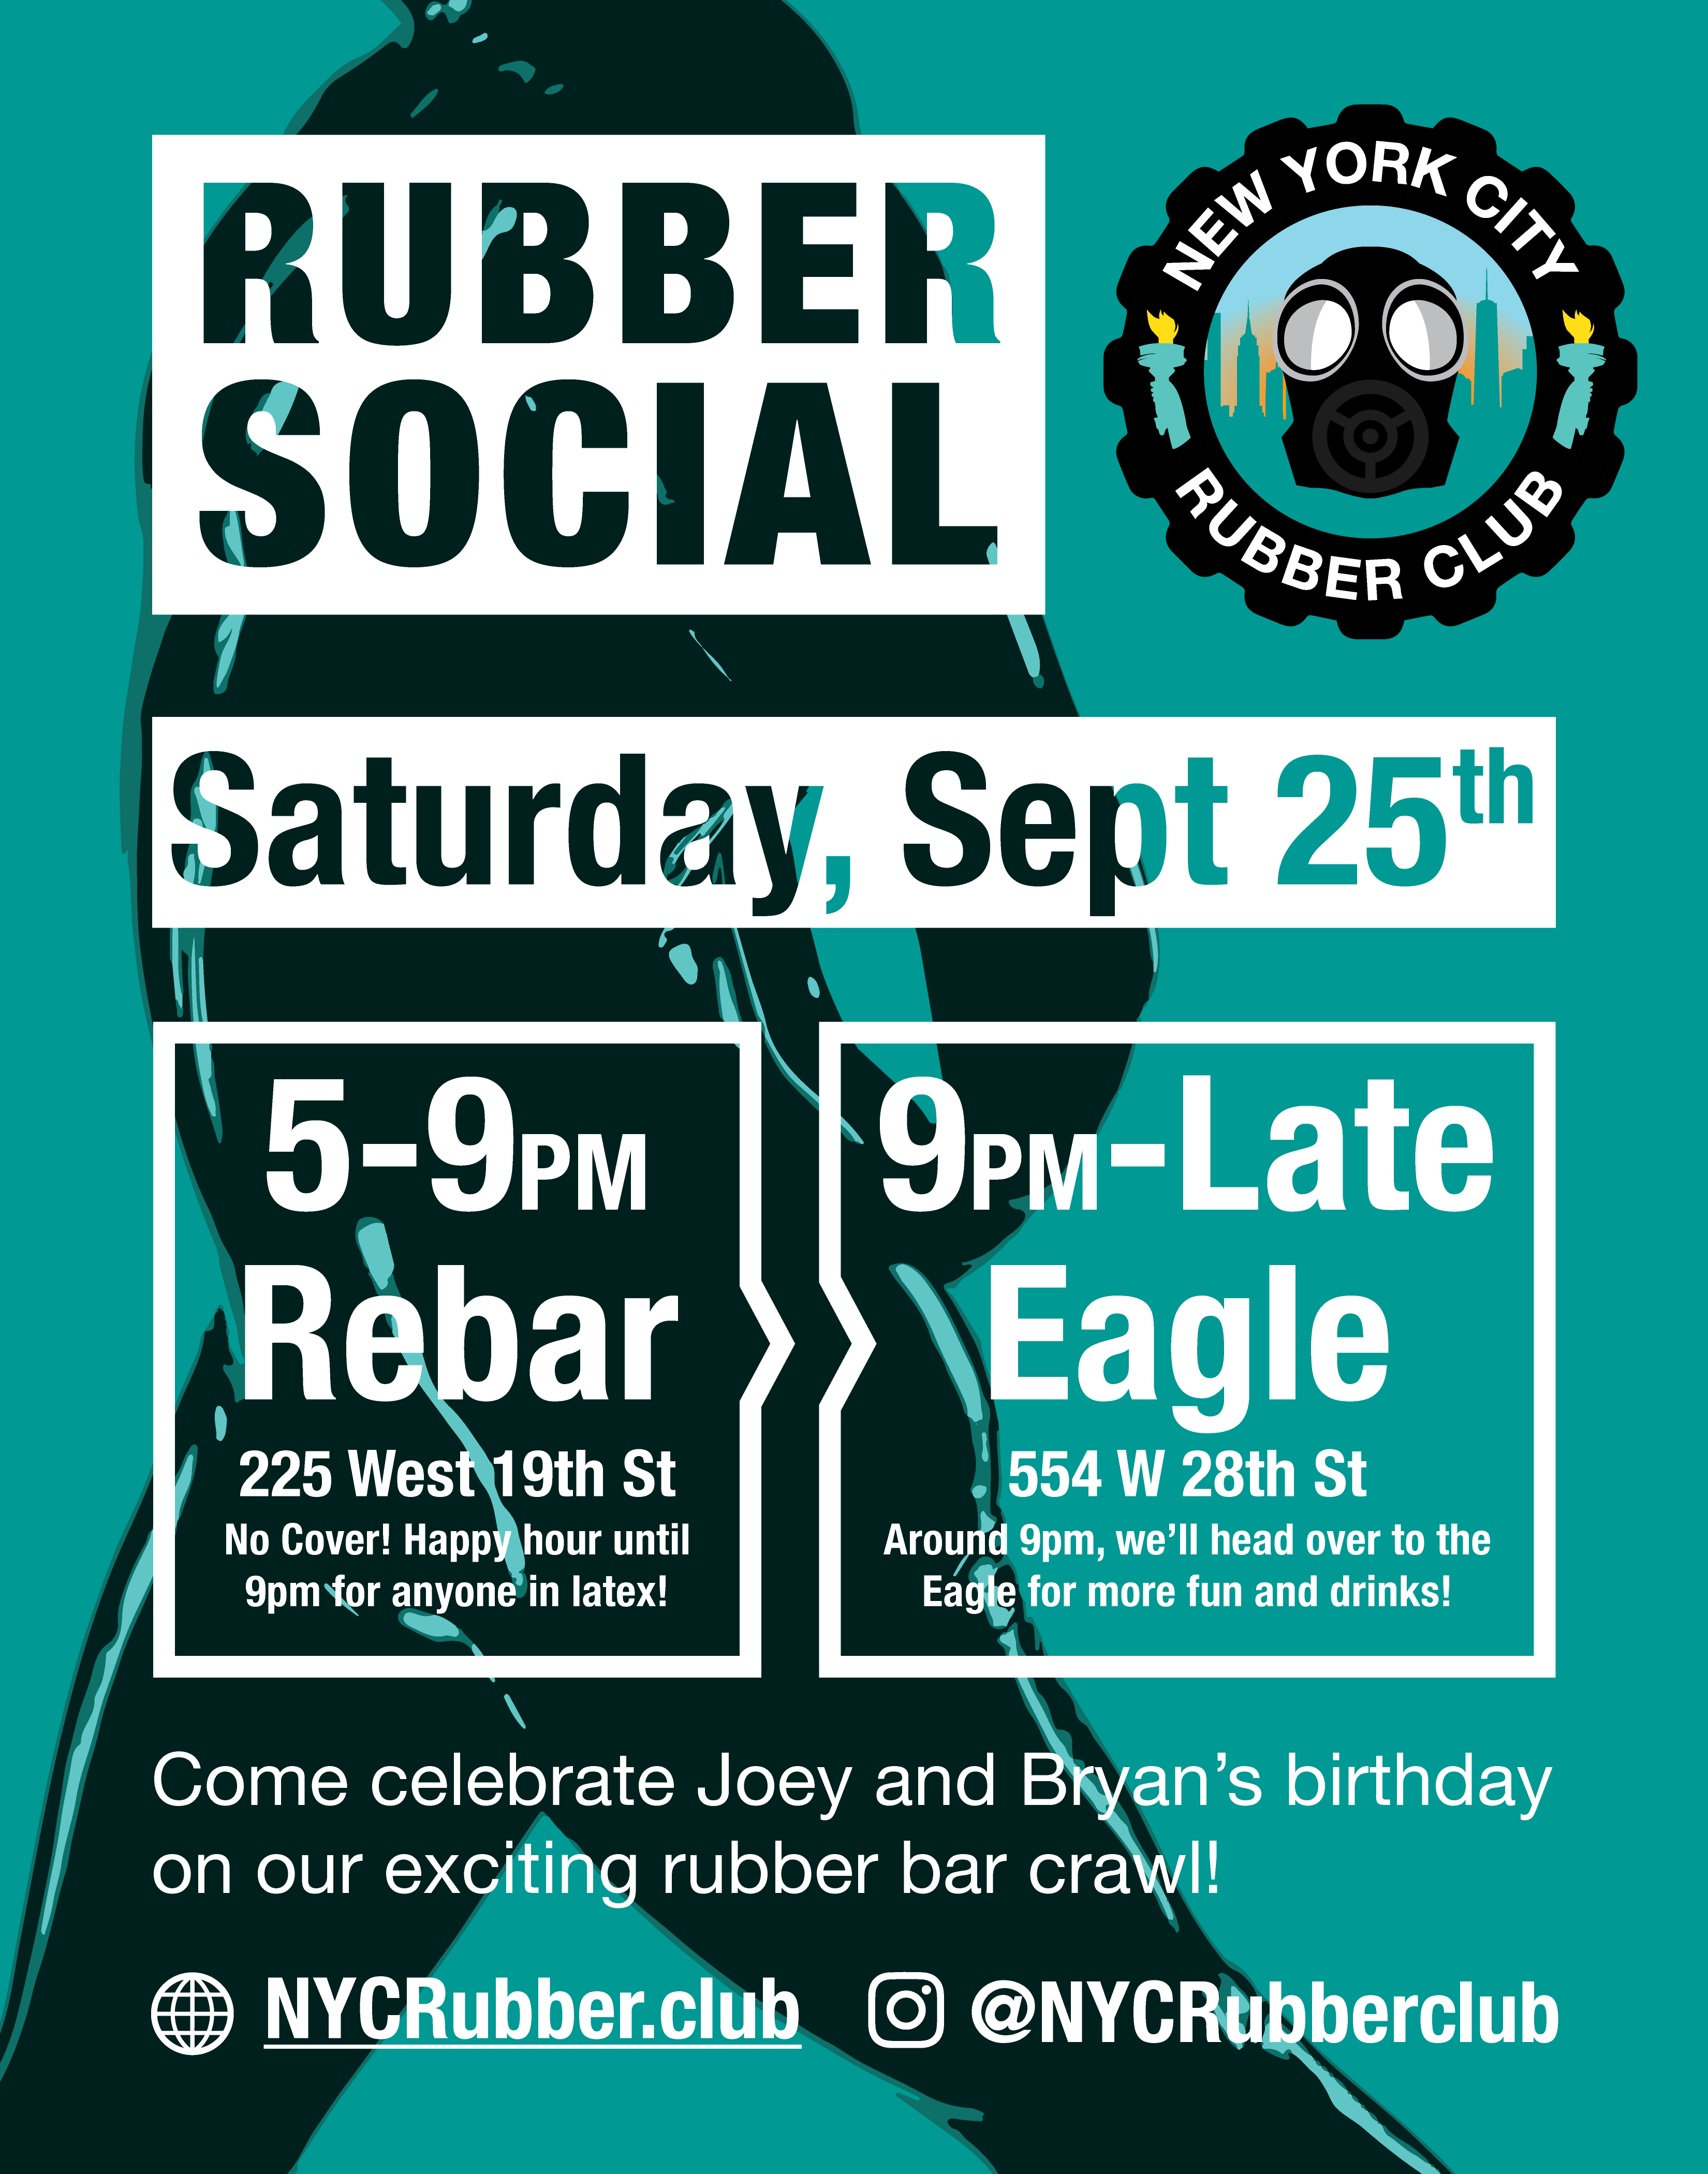 NYC rubber social event starting at Rebar 5-9pm and ending at the eagle 9pm to late on September 25th